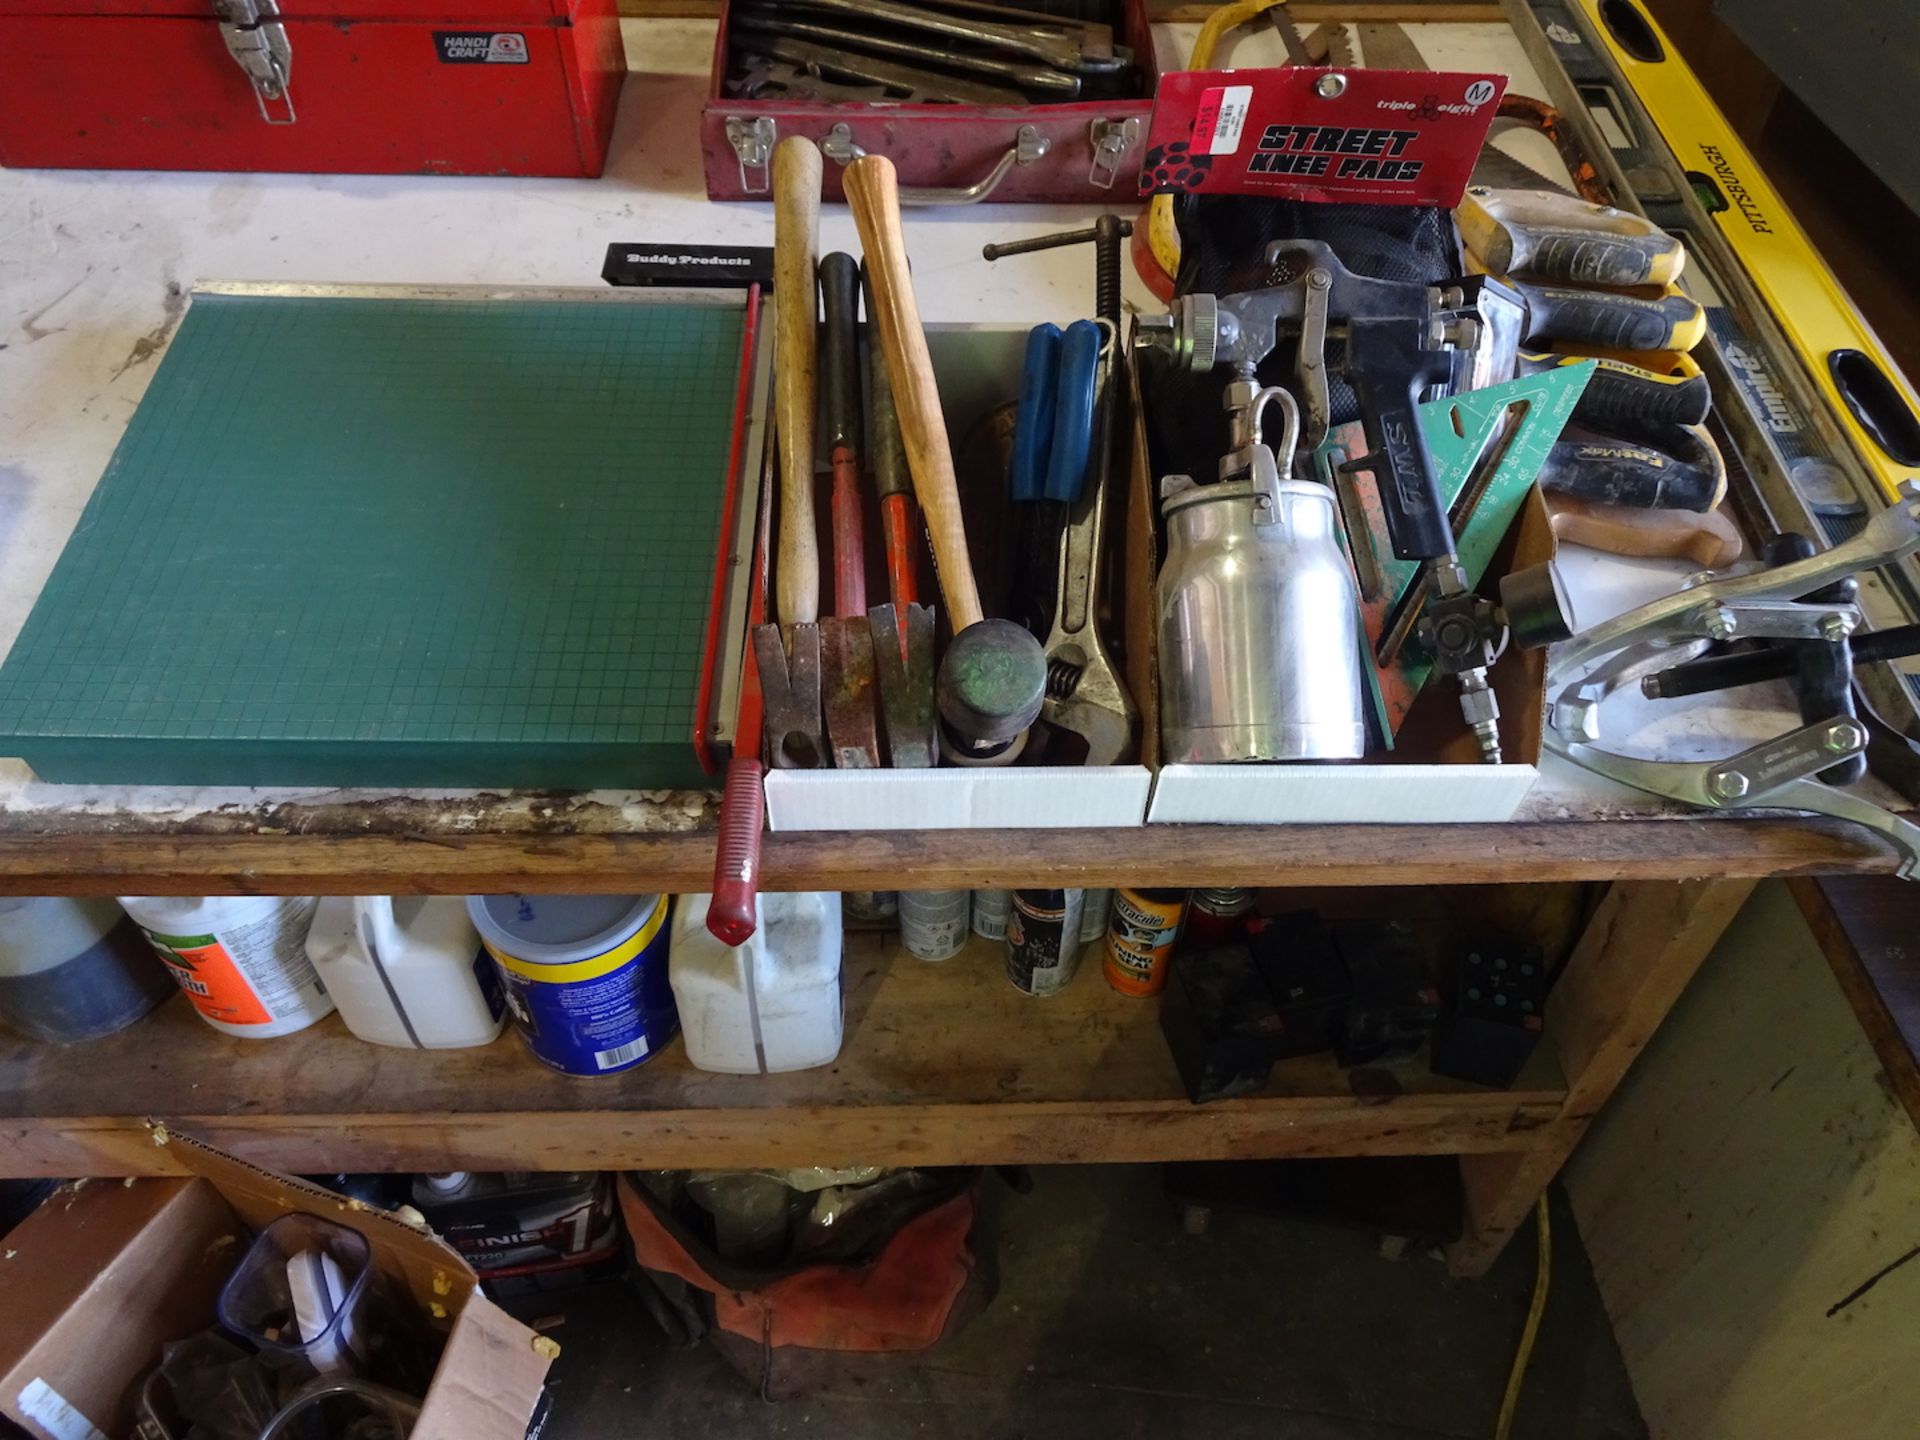 ASSORTED TOOLS; LEVELS, HAND SAWS, HAMMERS, PULLER, SPRAY GUN & MISC. - Image 2 of 2